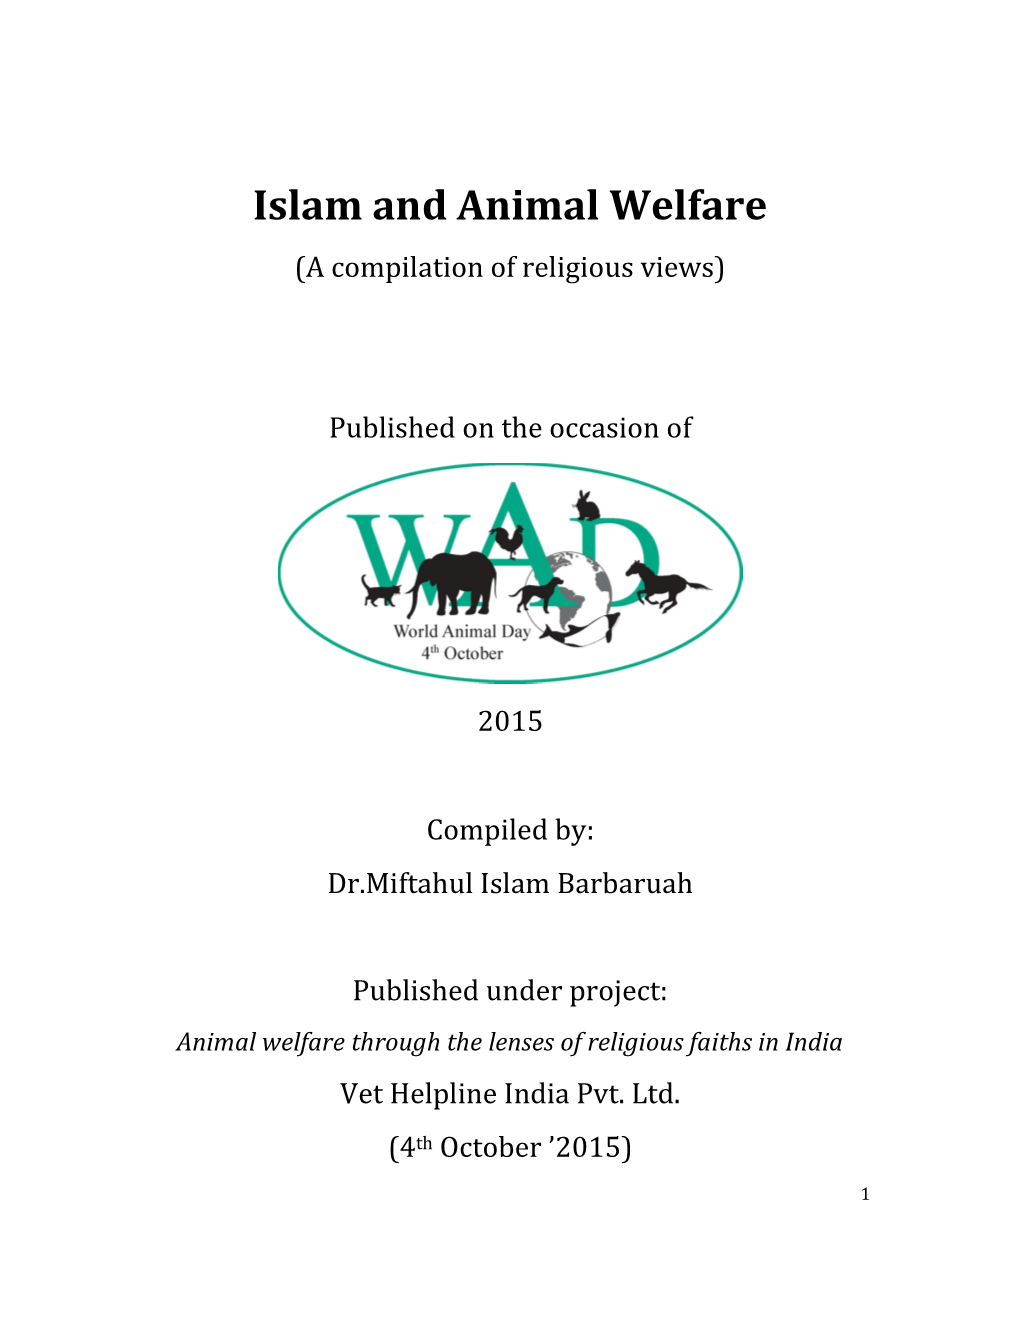 Islam and Animal Welfare (A Compilation of Religious Views)